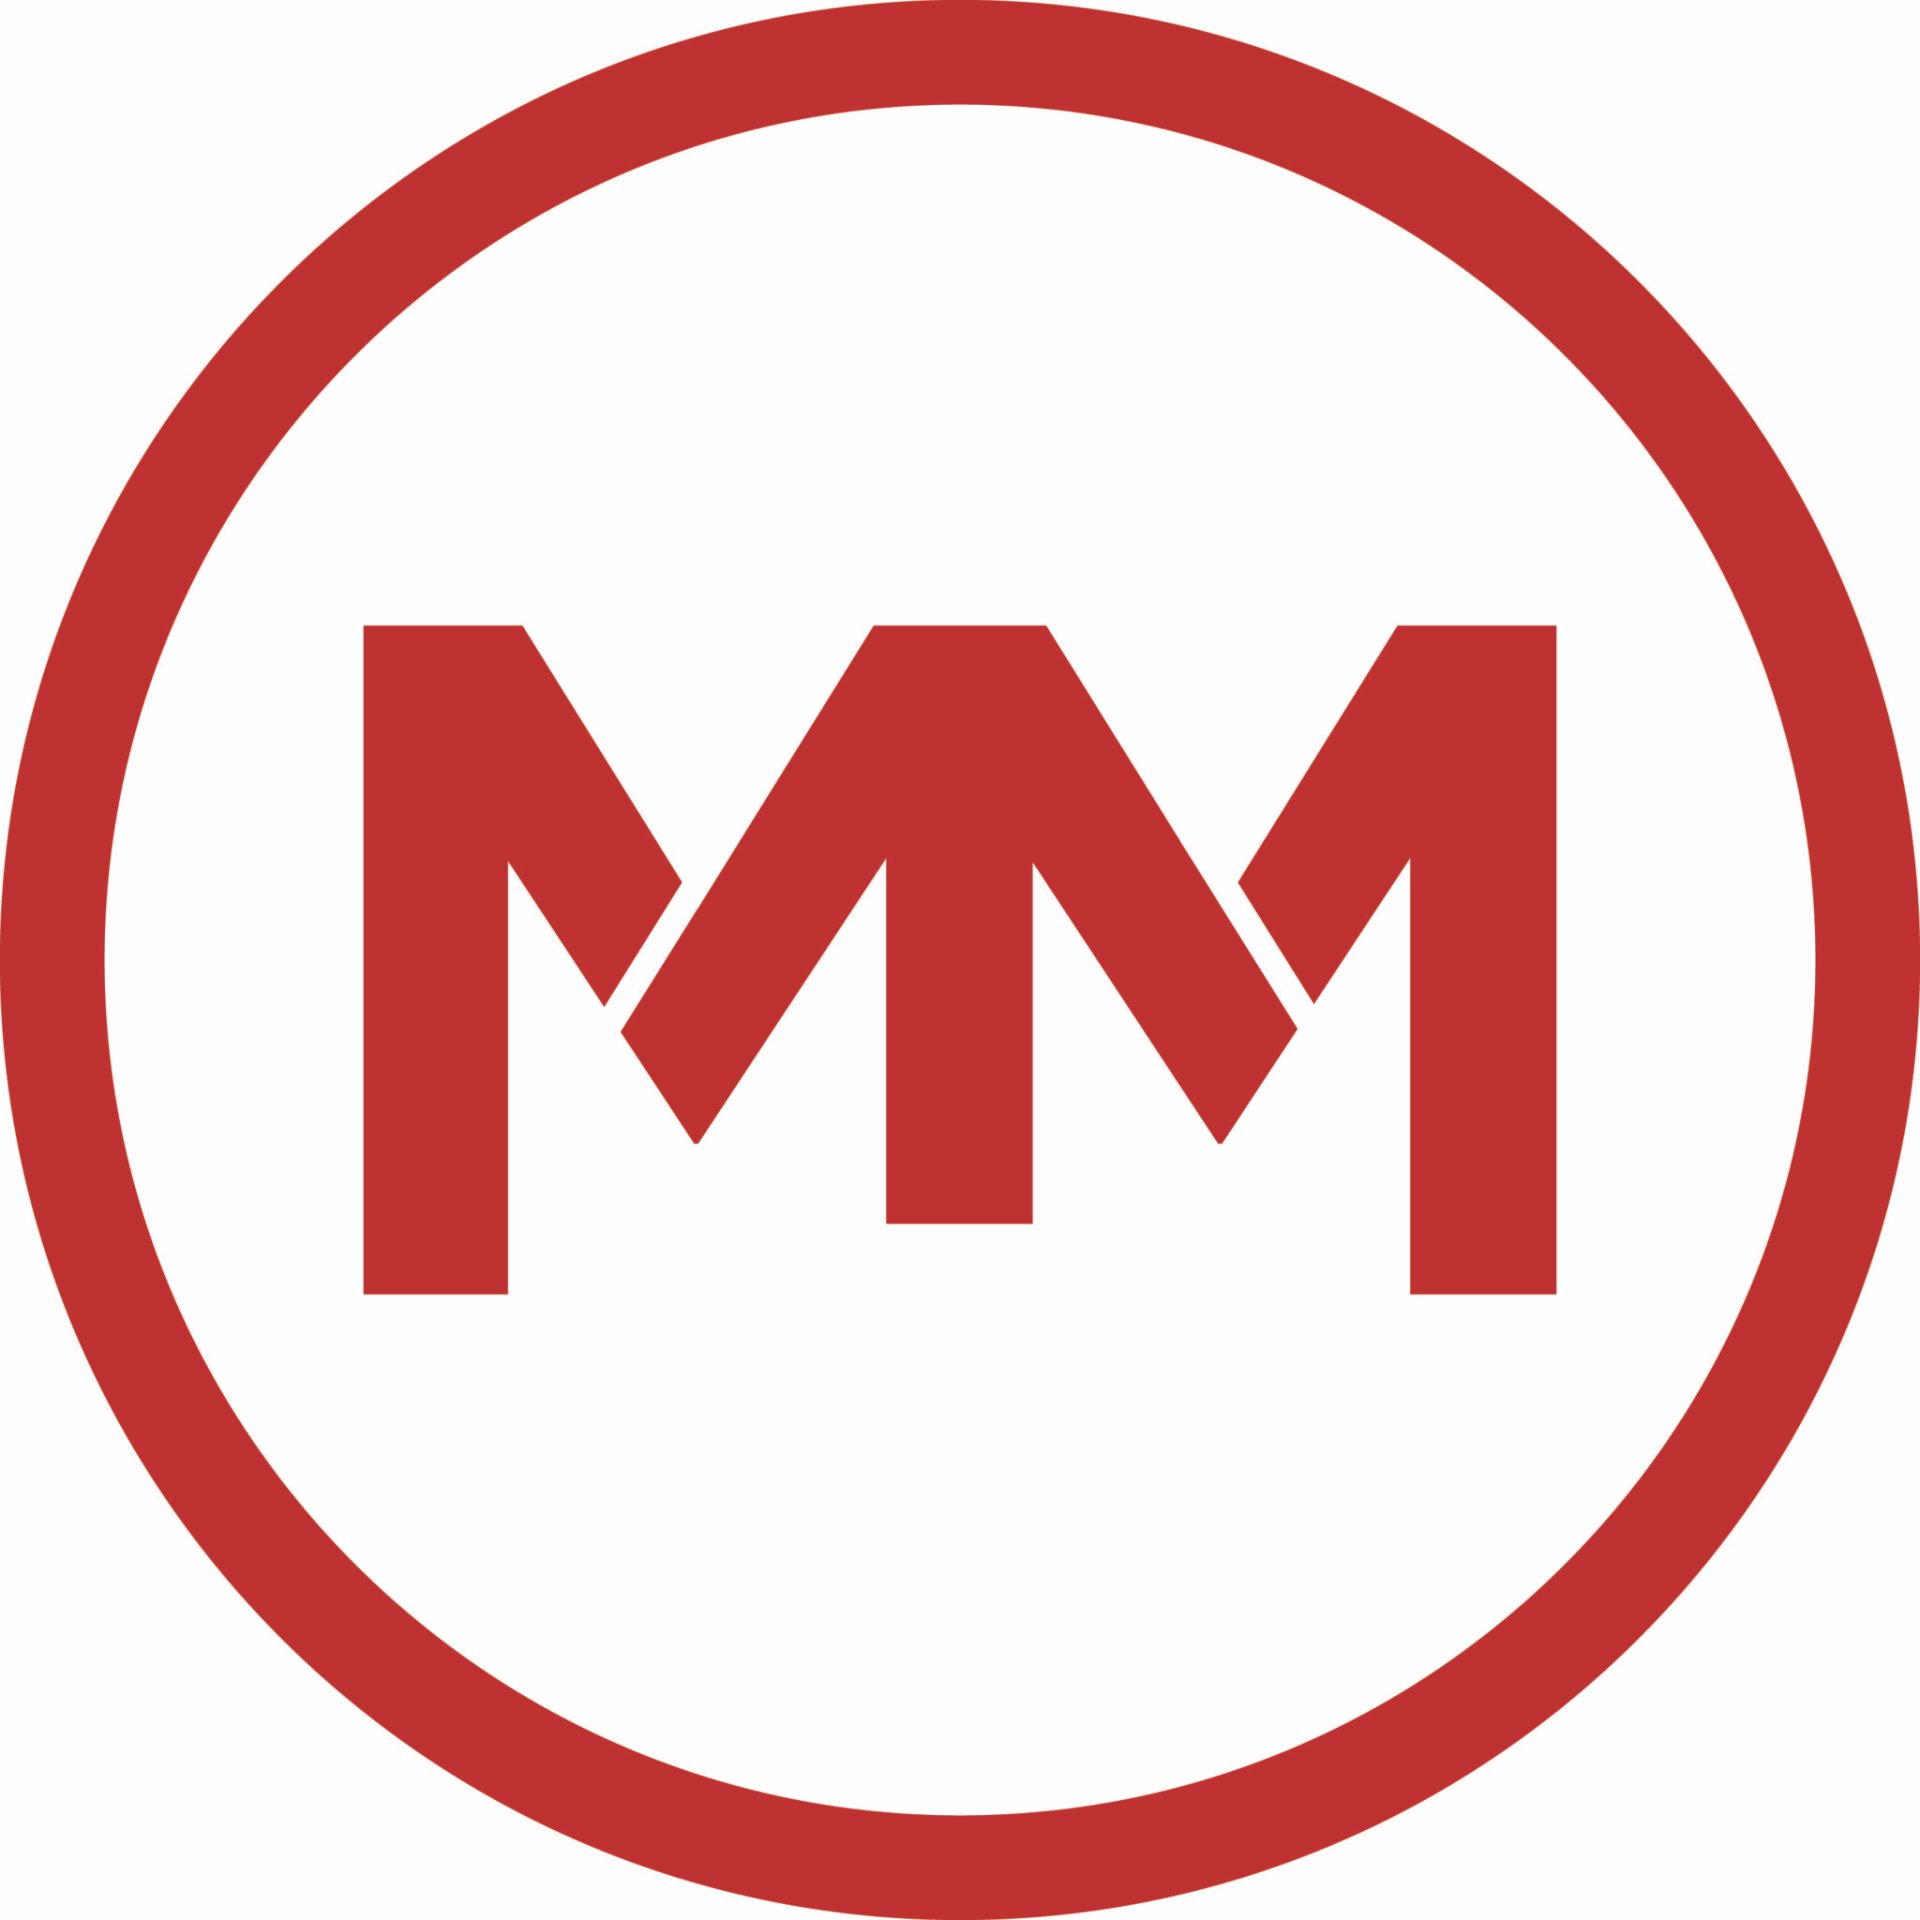 Movement Mortgage "MM" red logo